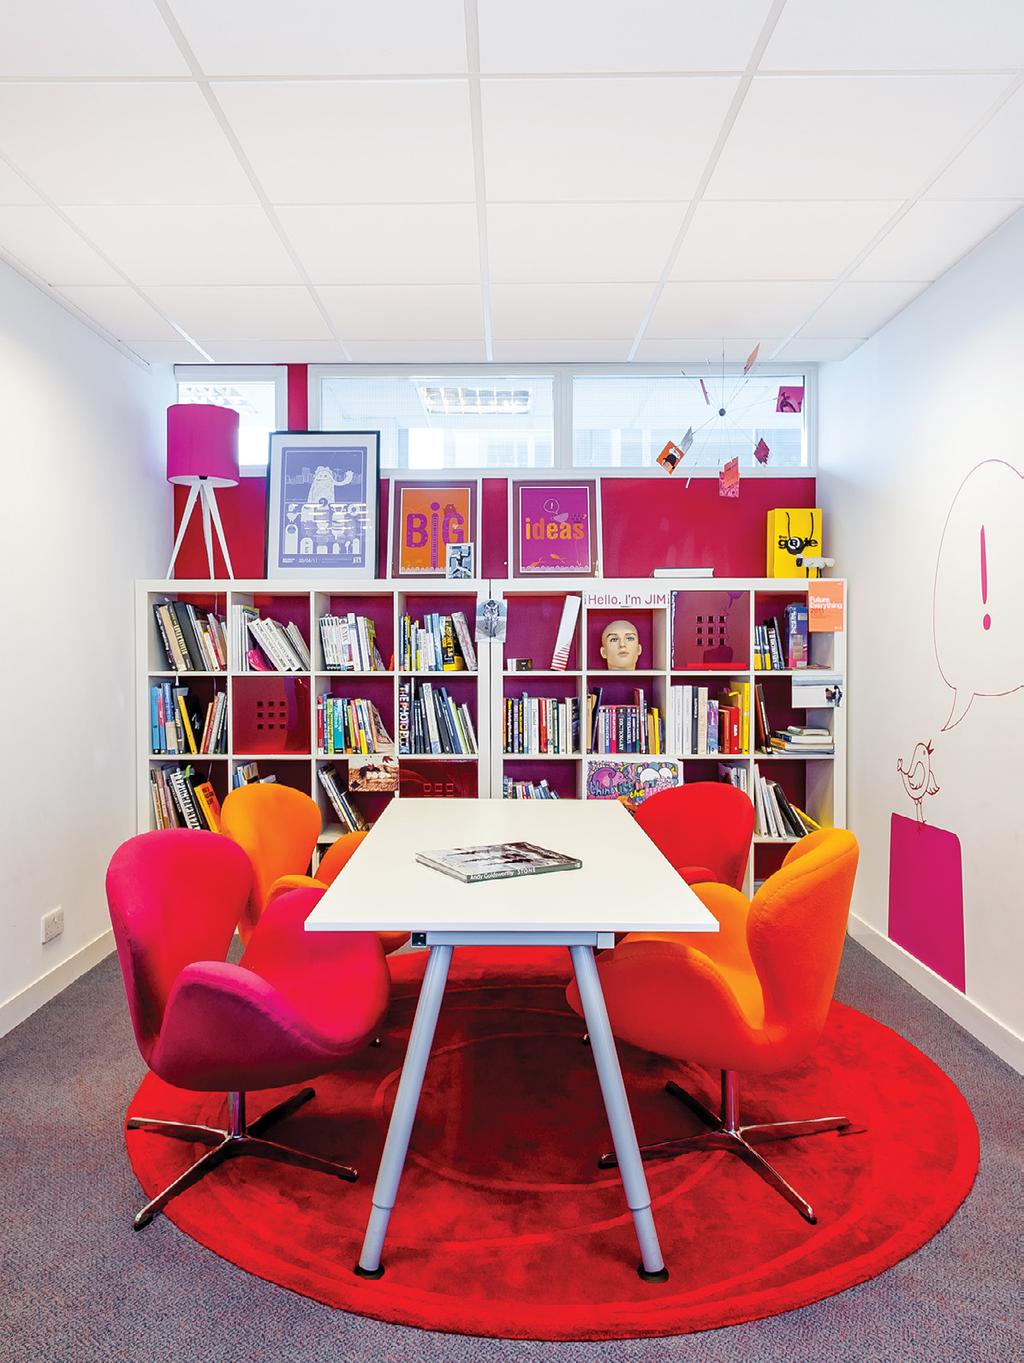 We can help every step of the way with design consultancy, space planning, fit-out and relocation.